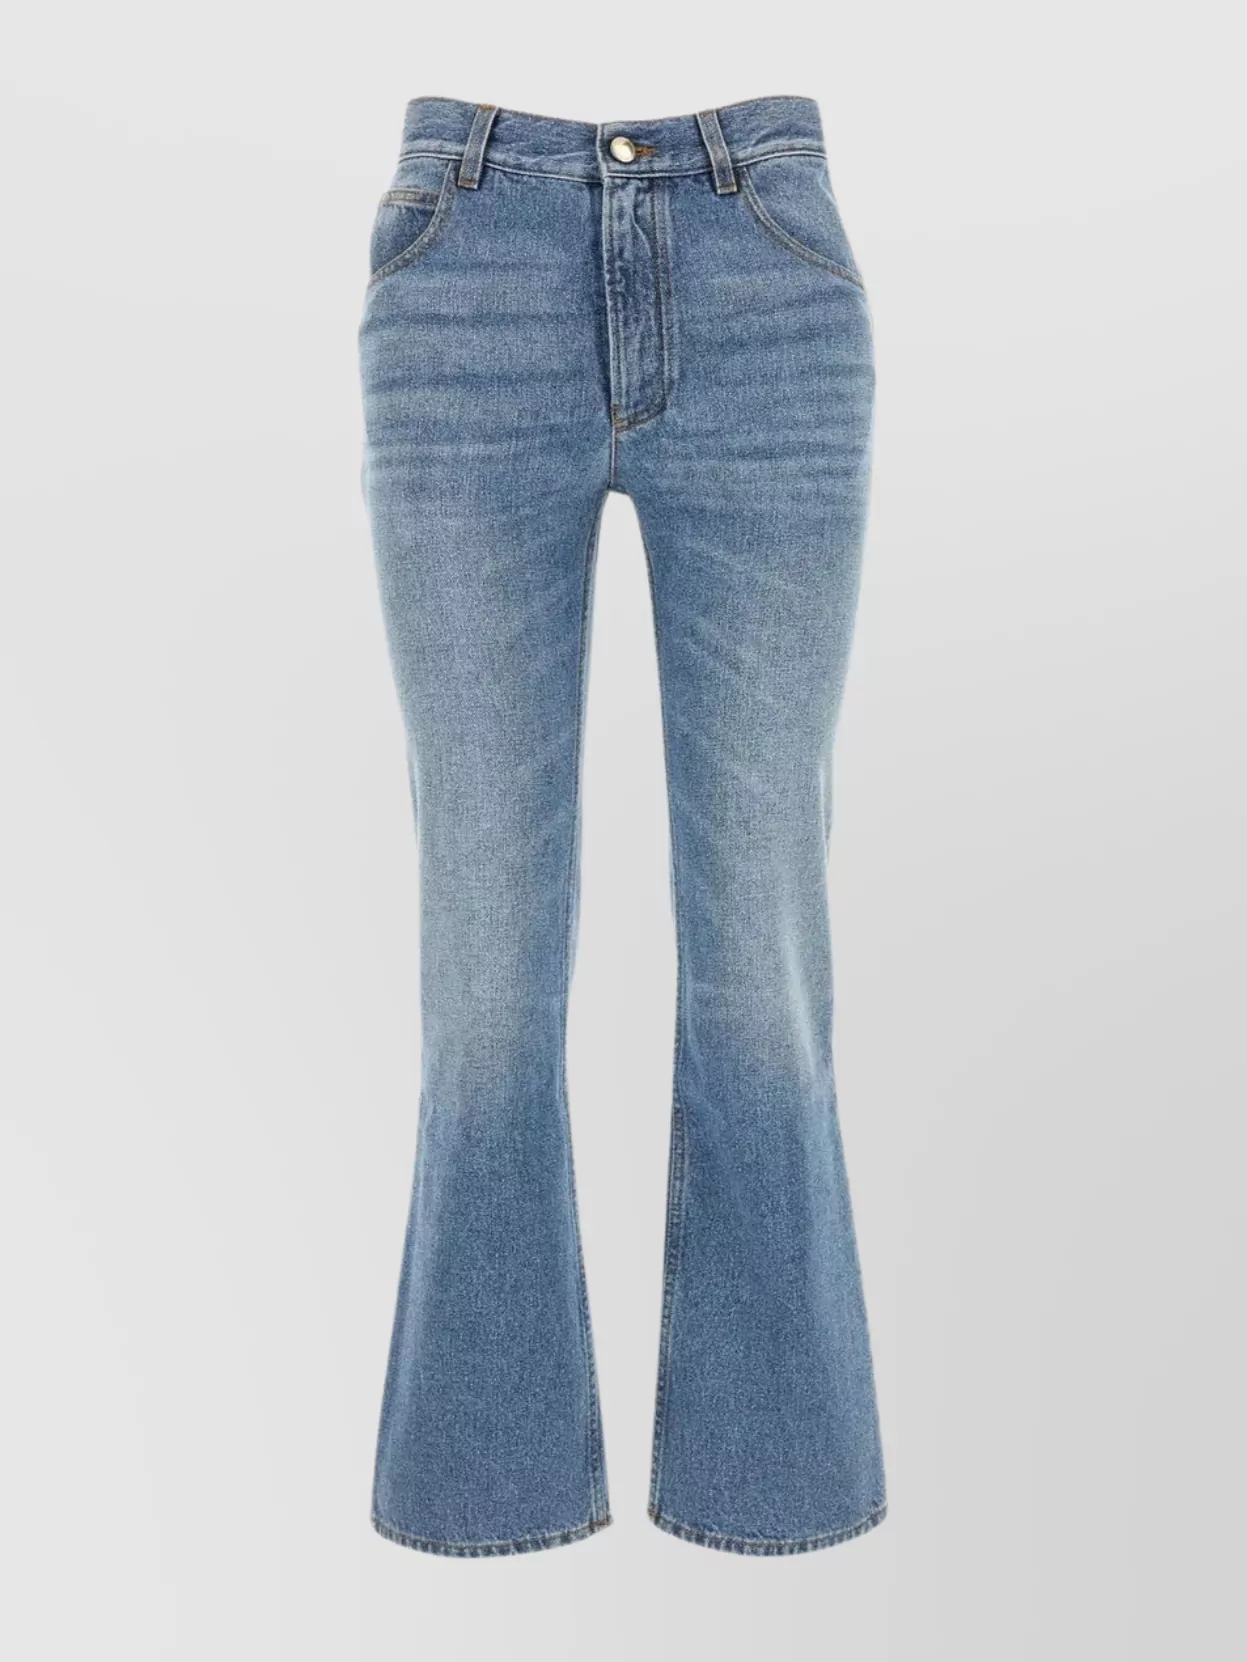 Shop Chloé Cropped Denim Jeans With Belt Loops And Flared Leg In Blue